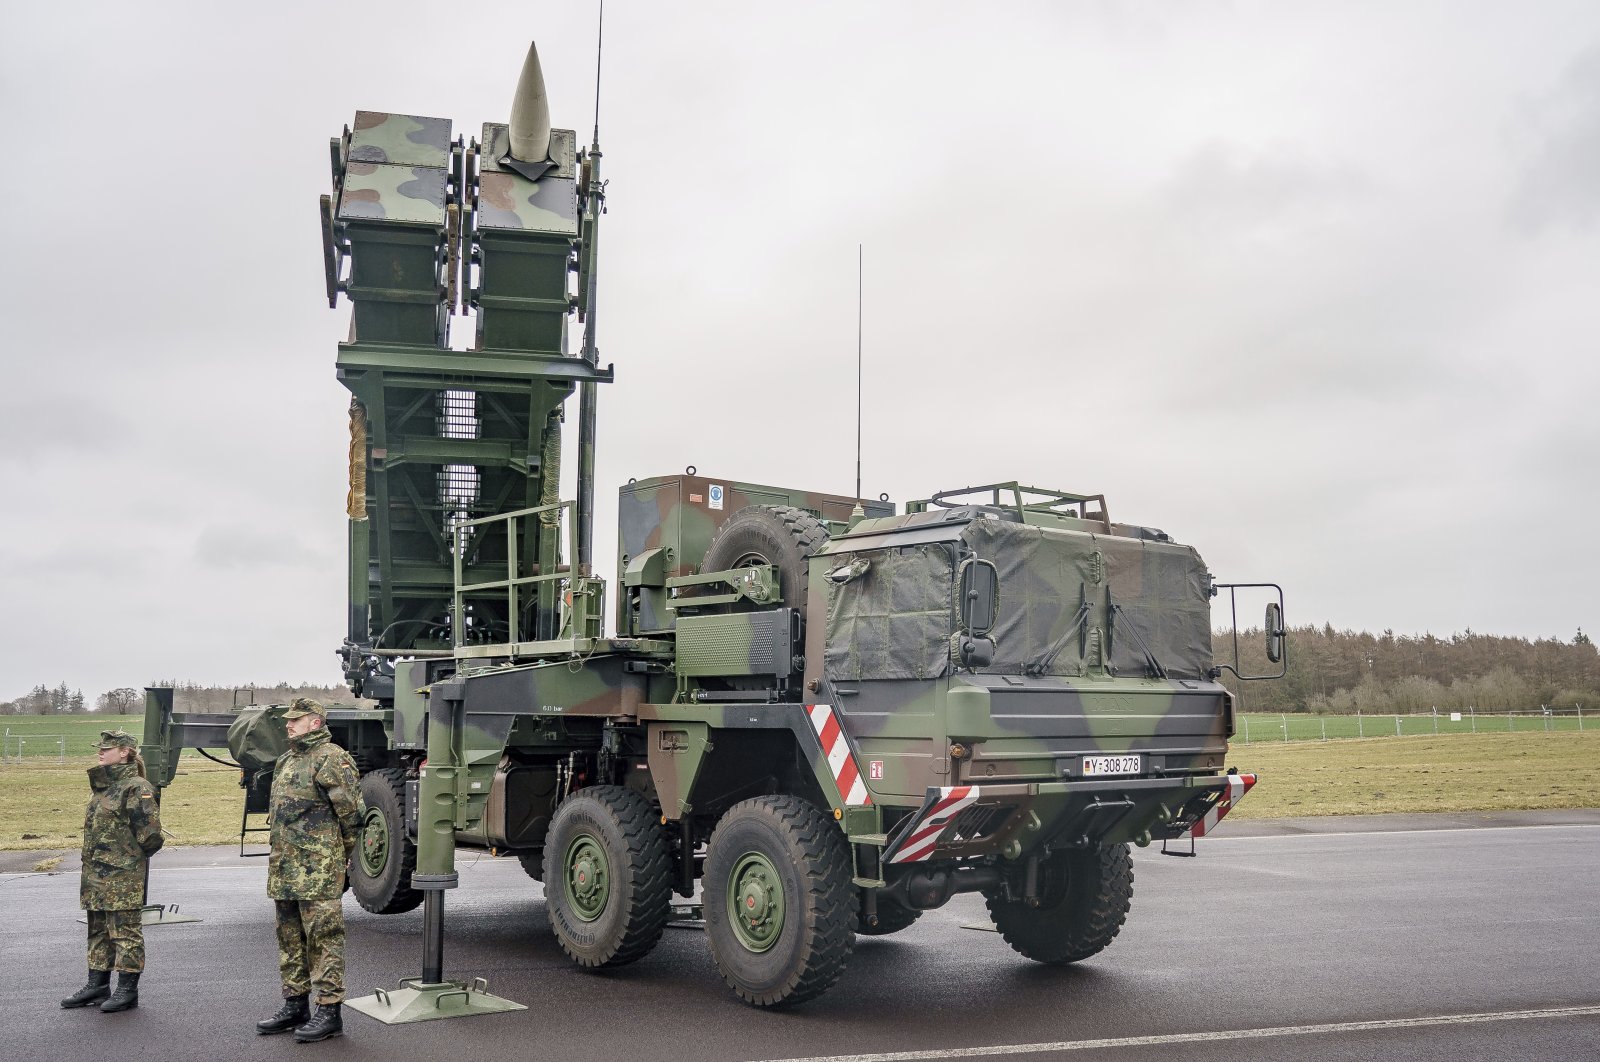 Ready-for-combat Patriot anti-aircraft missile systems of the German forces Bundeswehr stand on the airfield of a military airport in Schwesing, Germany, March 17, 2022. (AP Photo)